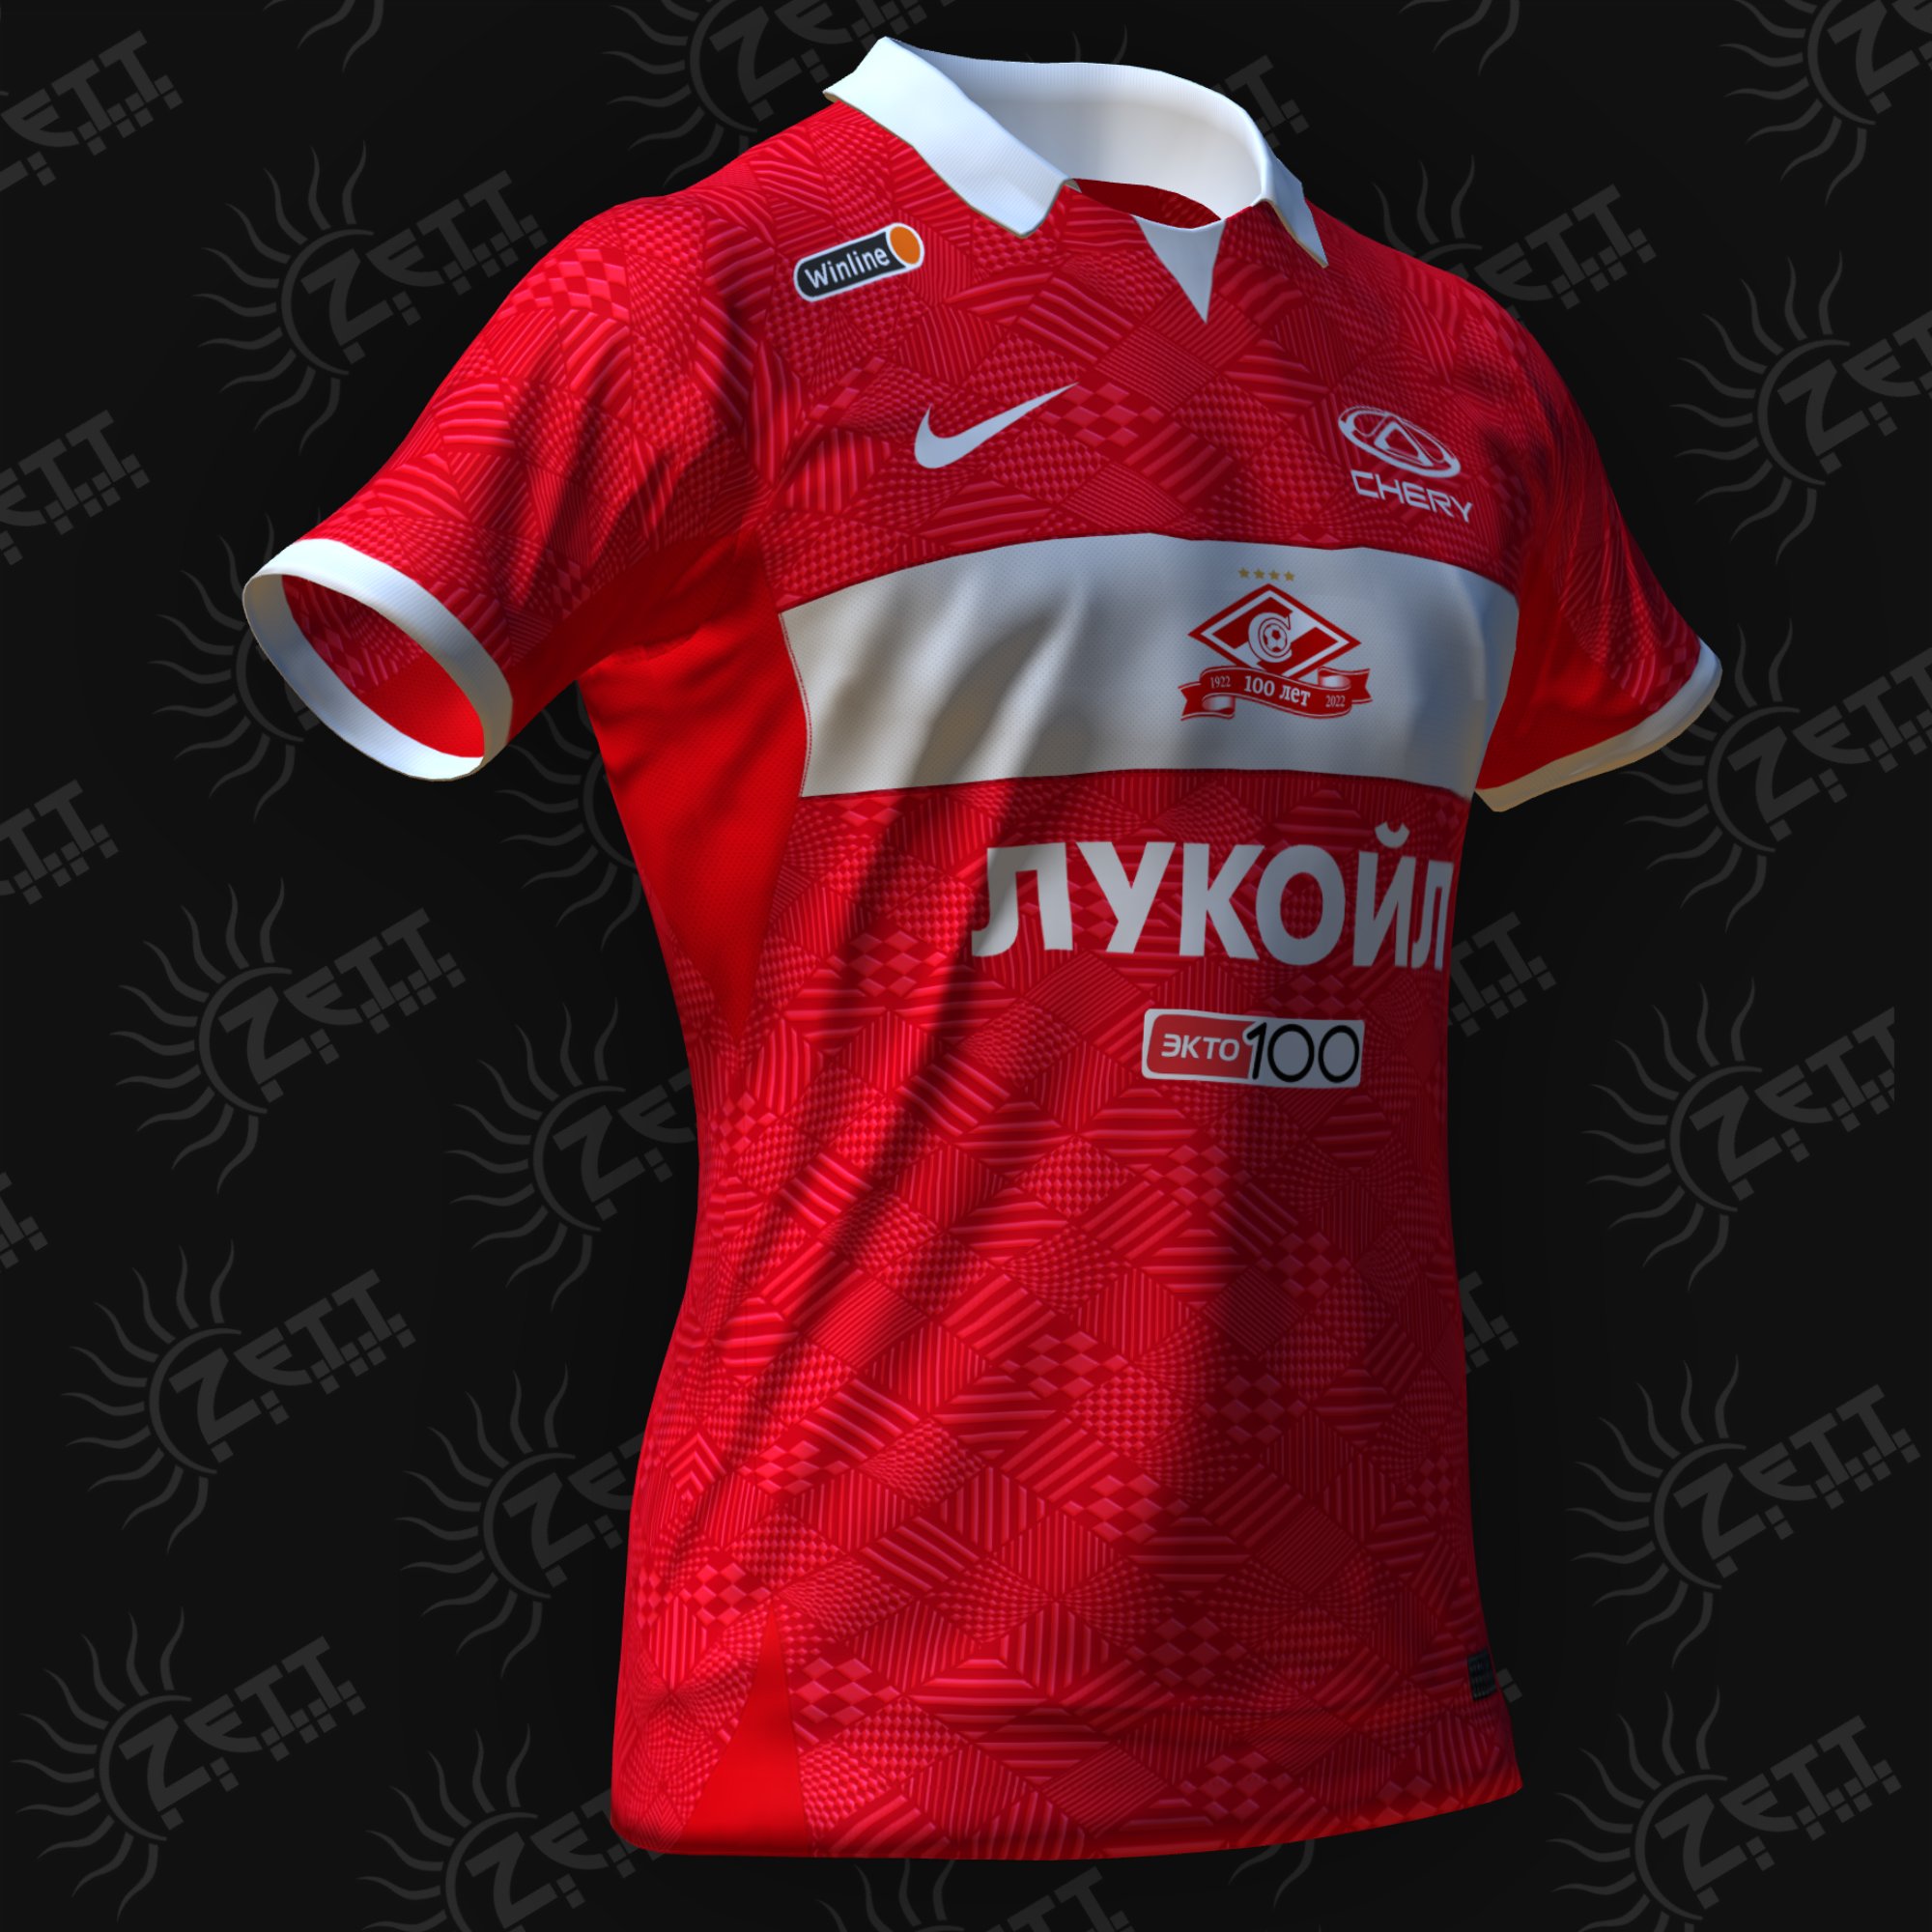 Max Zett on X: FC Spartak Moscow full kits pack 2020-2021 for PES  2018-2021 Downloads (PNG):  best club in the world!  #bestclubintheworld @fcsm_official @nikefootball @Nike @Footy_Headlines  @PESMasterSite #Spartak #Nike https